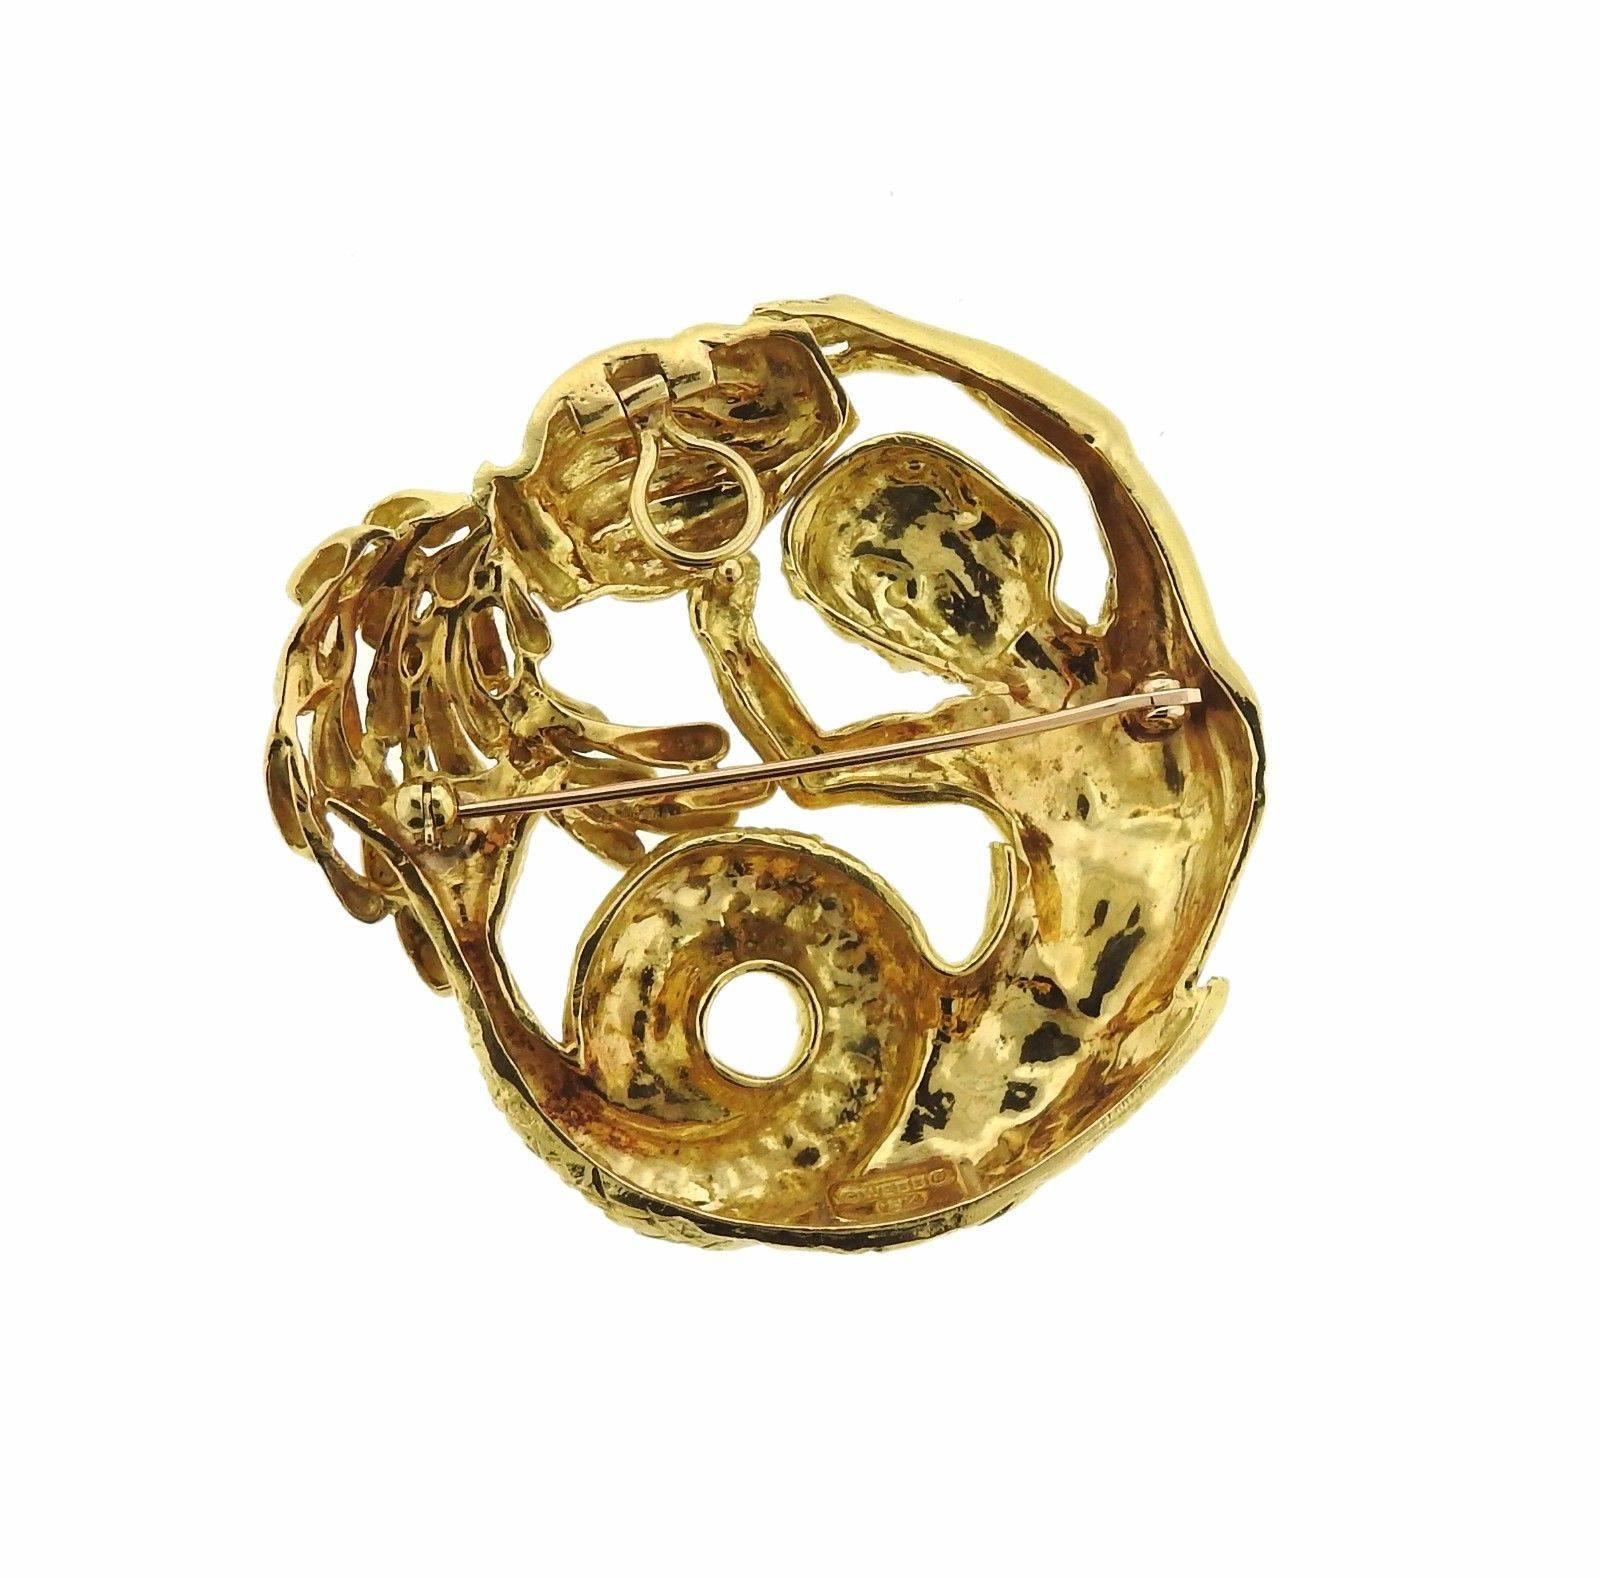 An 18k gold brooch depicting the Aquarius zodiac sign.  The brooch measures 53mm x 51mm and weighs 48.2 grams.  Marked: David Webb, 18k.